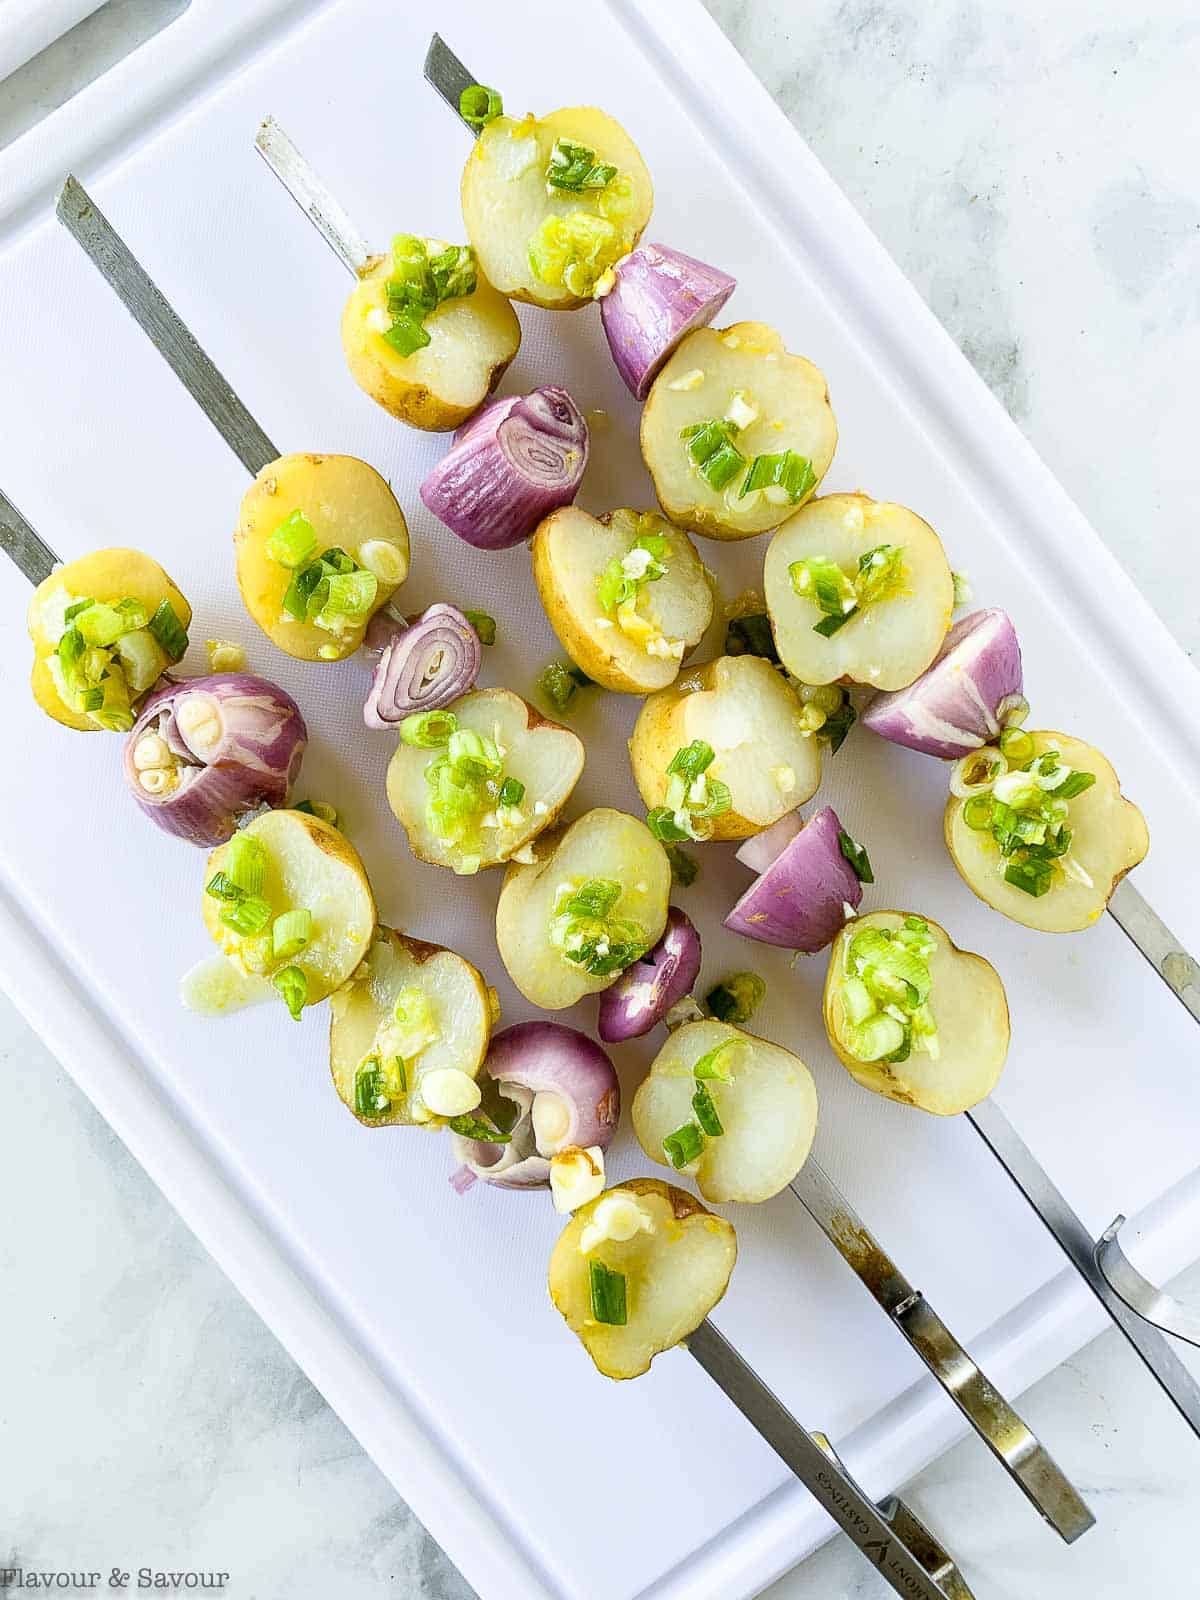 Potatoes and shallots on metal skewers.